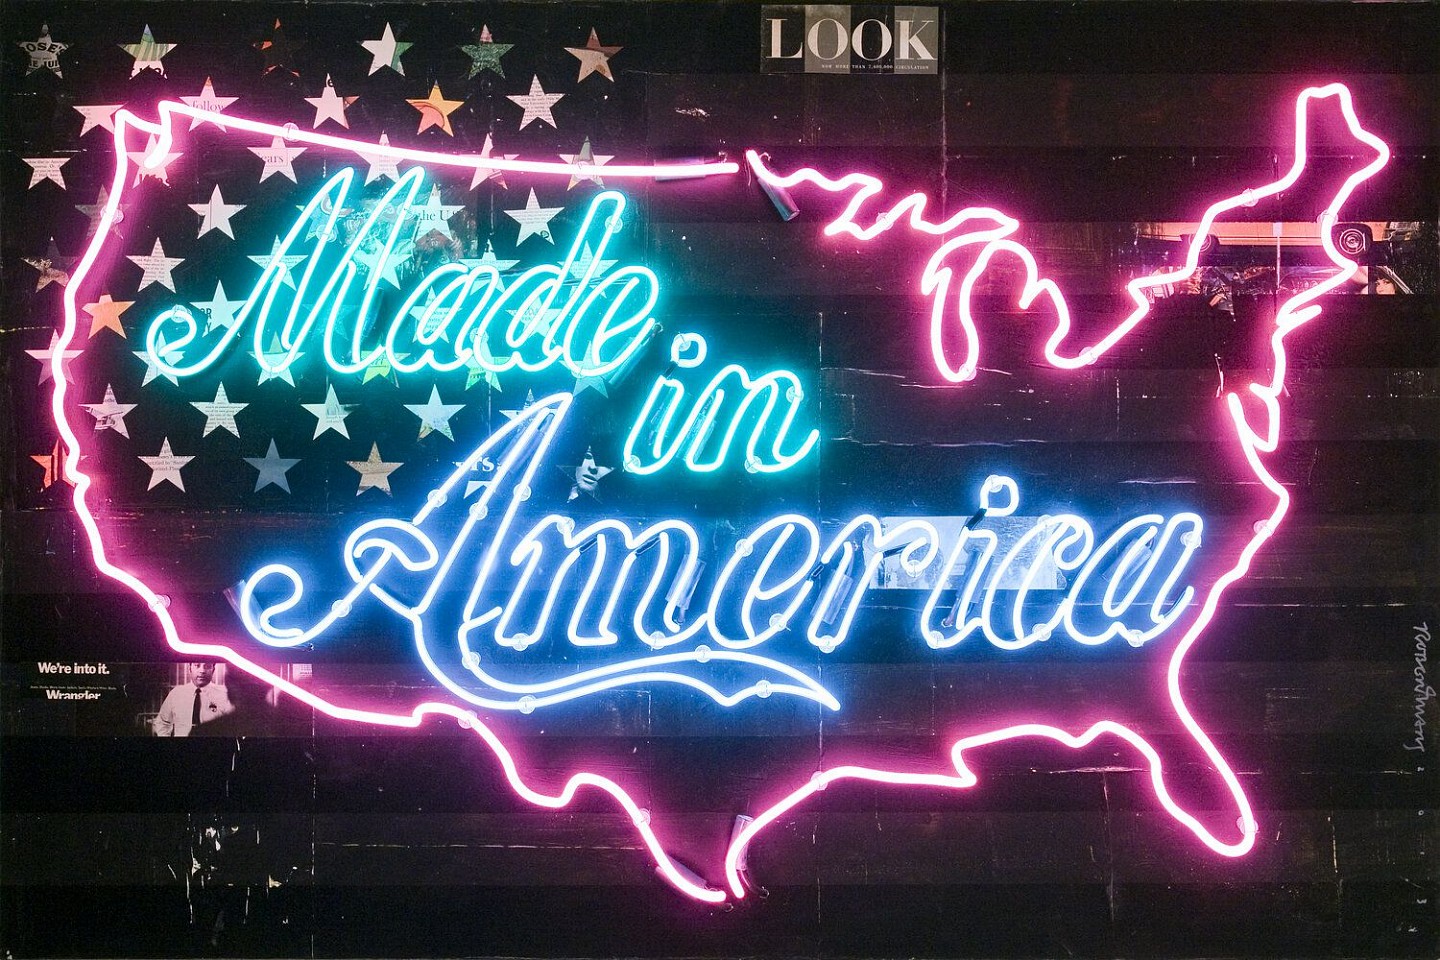 Robert Mars, Made in America Commission
Mixed Media and Collage on Wood Panel with Neon Tubing, 35 x 50 in. (88.9 x 127 cm)
SOLD
07787
&bull;